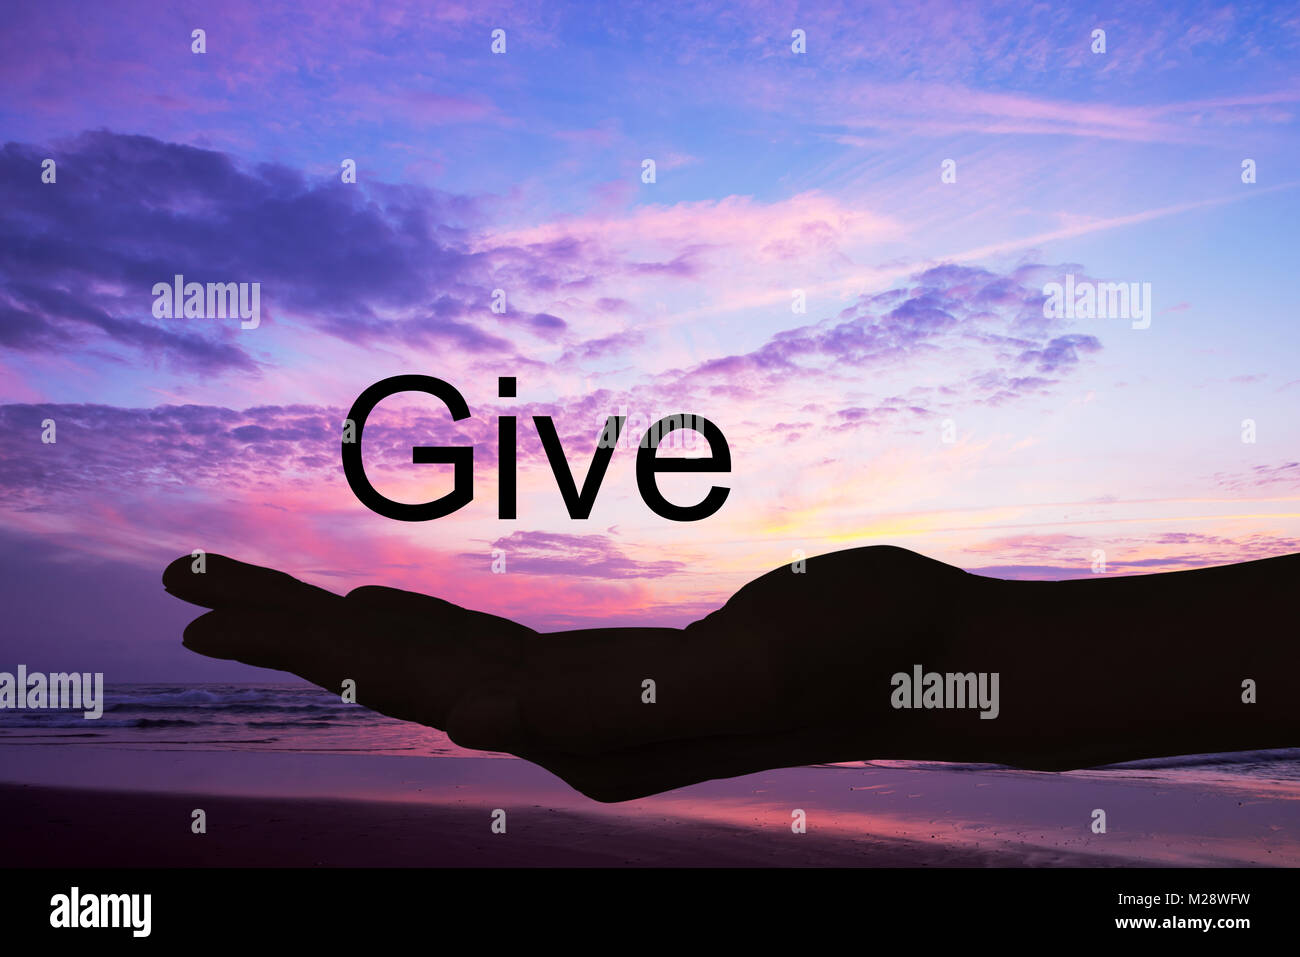 Hand offering the word give, sunset background Stock Photo